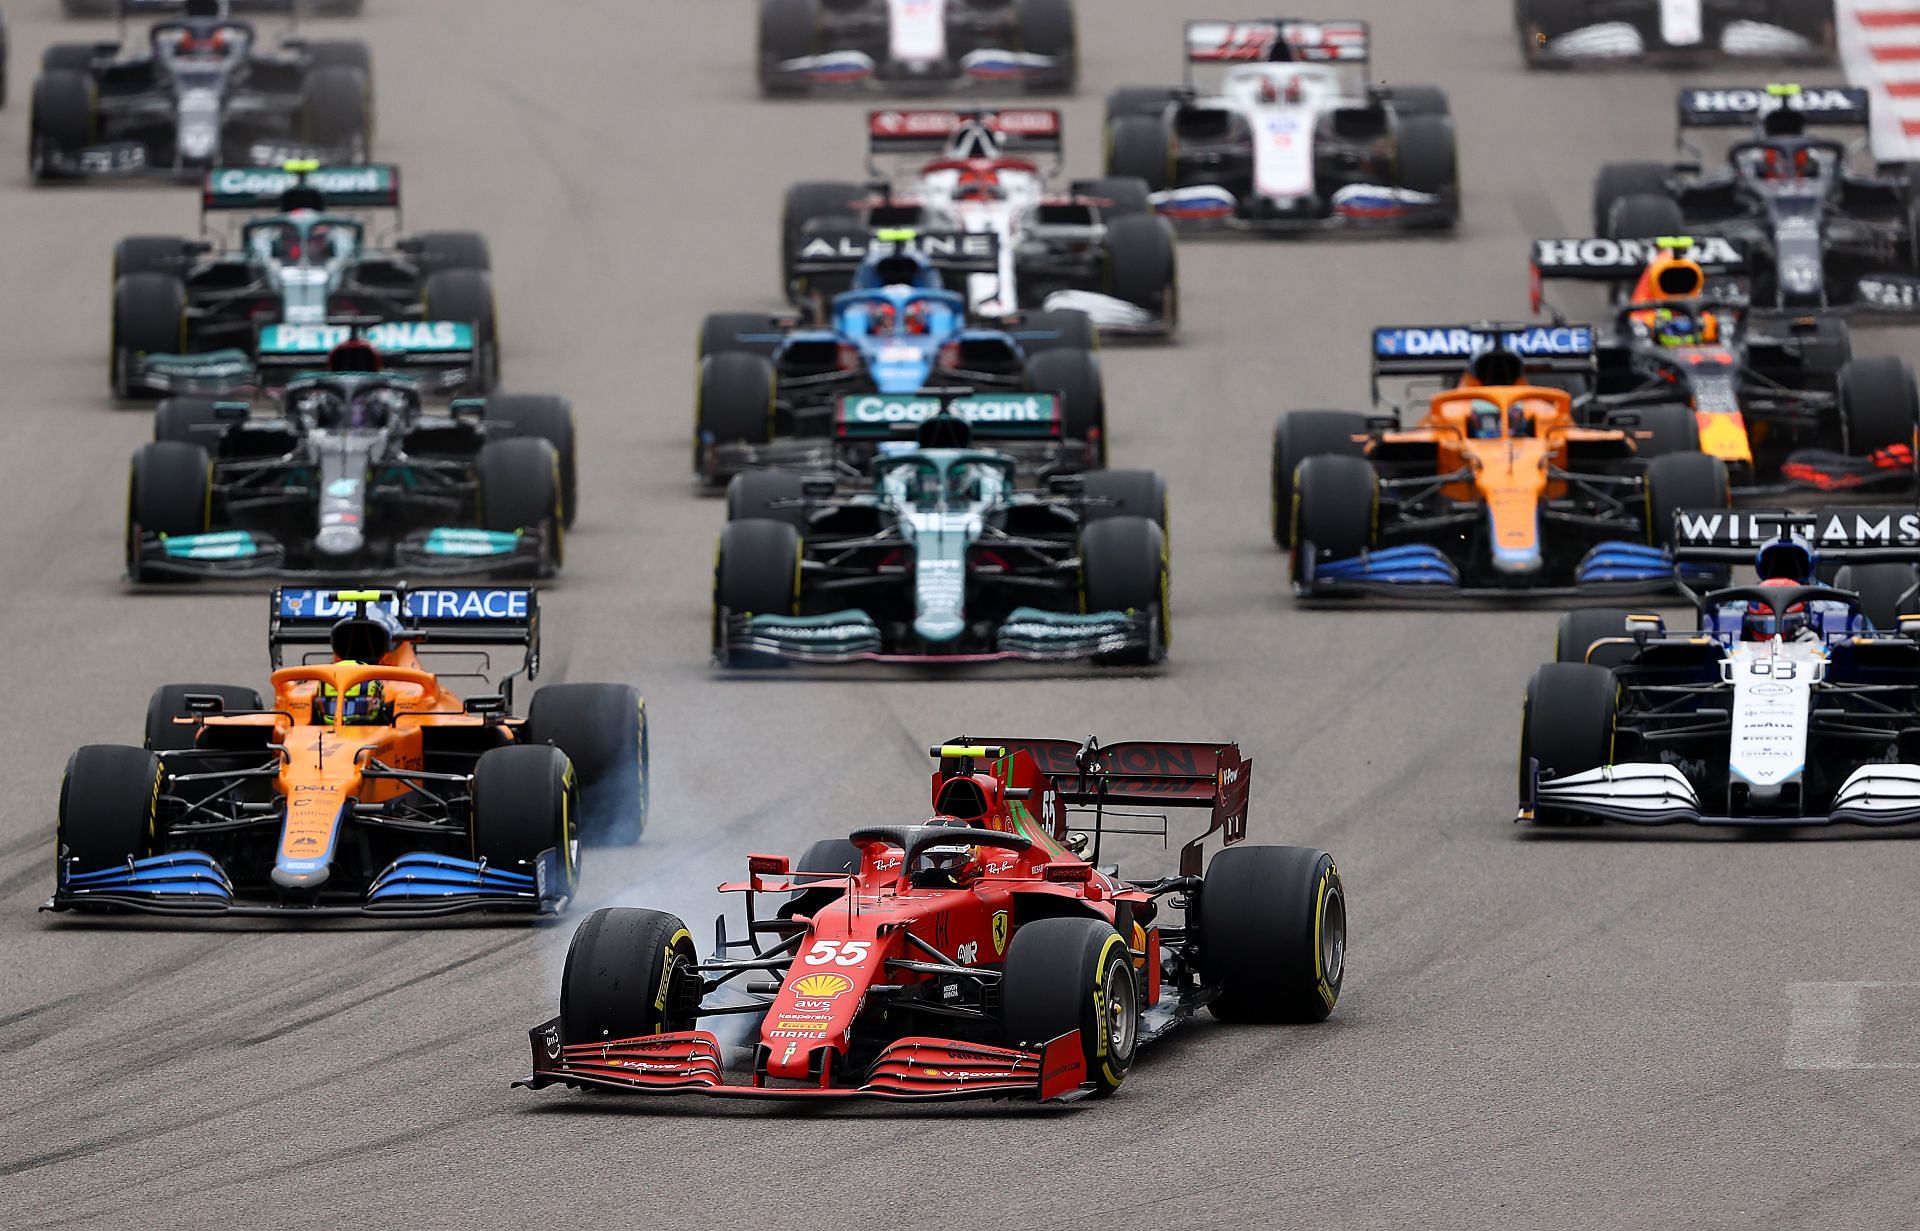 F1 Grand Prix of Russia start - Sochi Autodrom on September 26, 2021 in Sochi, Russia. (Photo by Bryn Lennon/Getty Images)